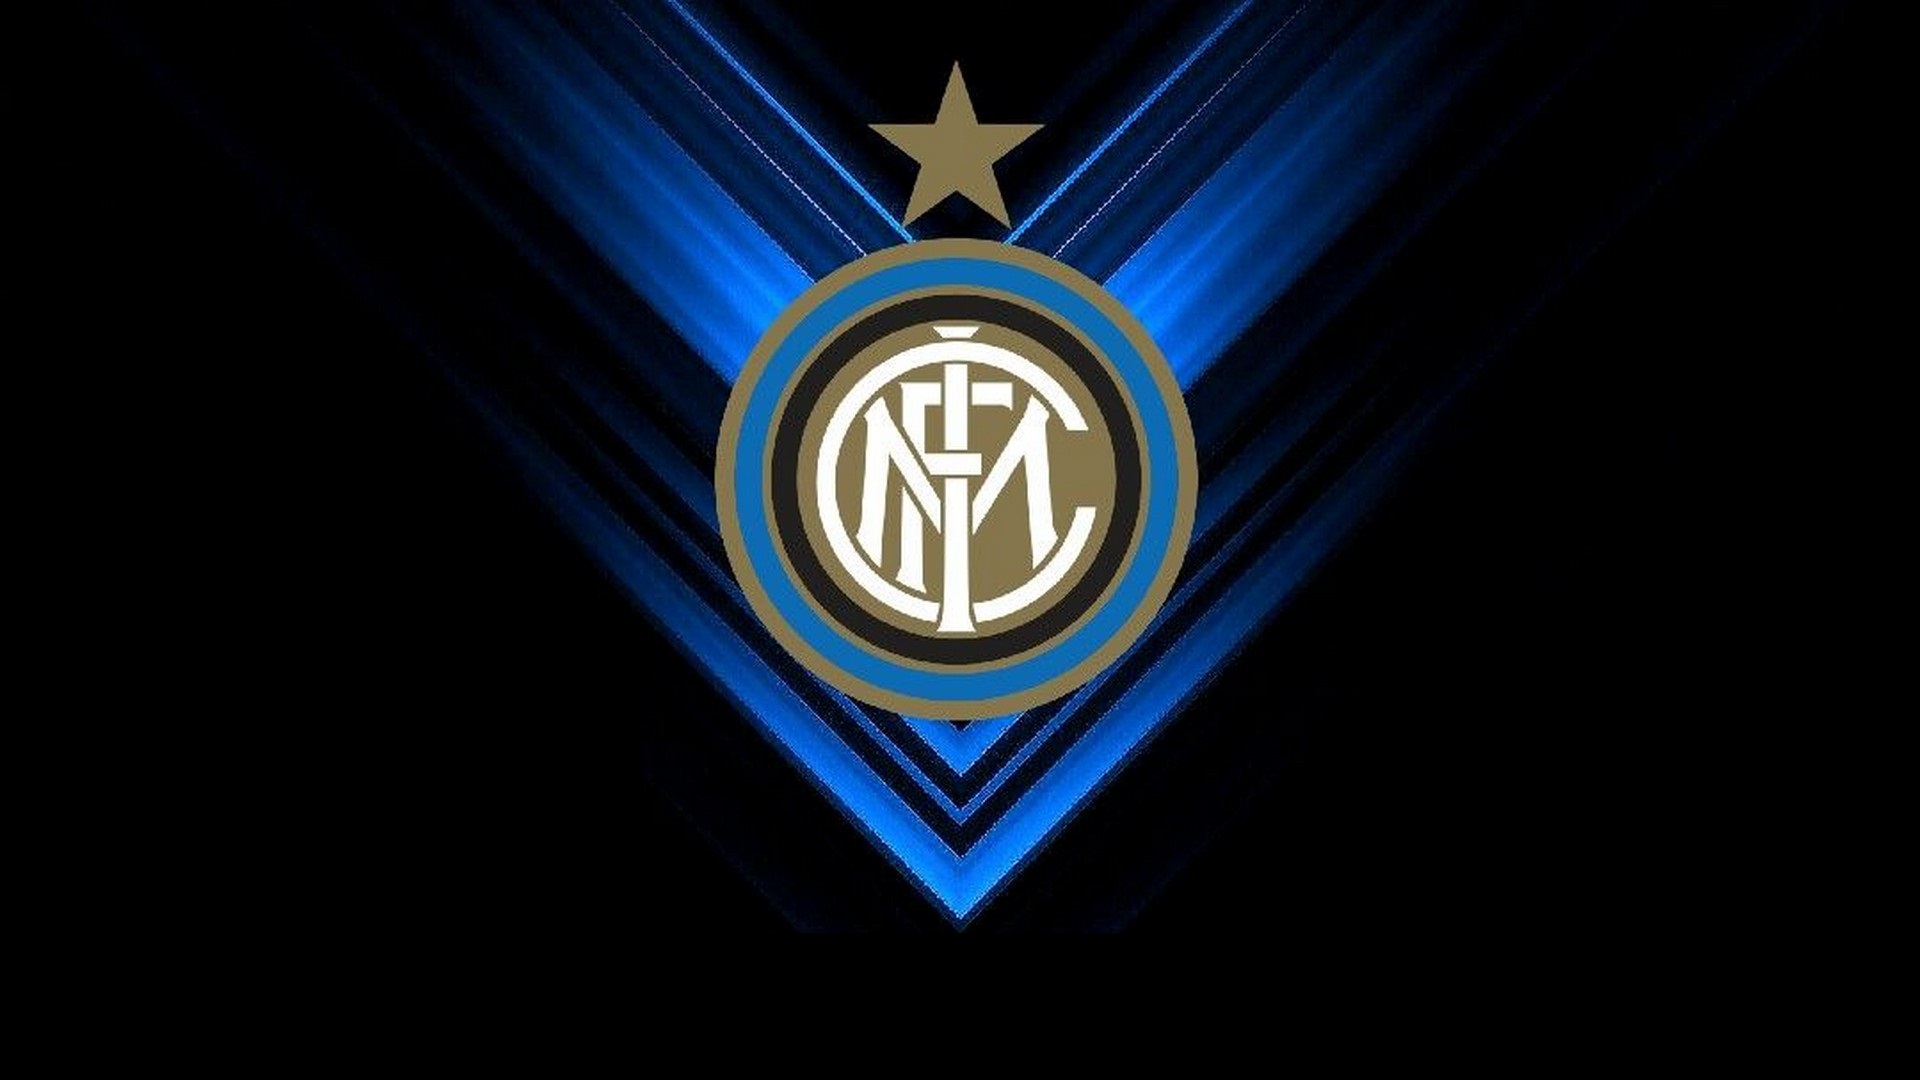 Inter Milan HD Wallpapers with high-resolution 1920x1080 pixel. You can use this wallpaper for your Desktop Computers, Mac Screensavers, Windows Backgrounds, iPhone Wallpapers, Tablet or Android Lock screen and another Mobile device